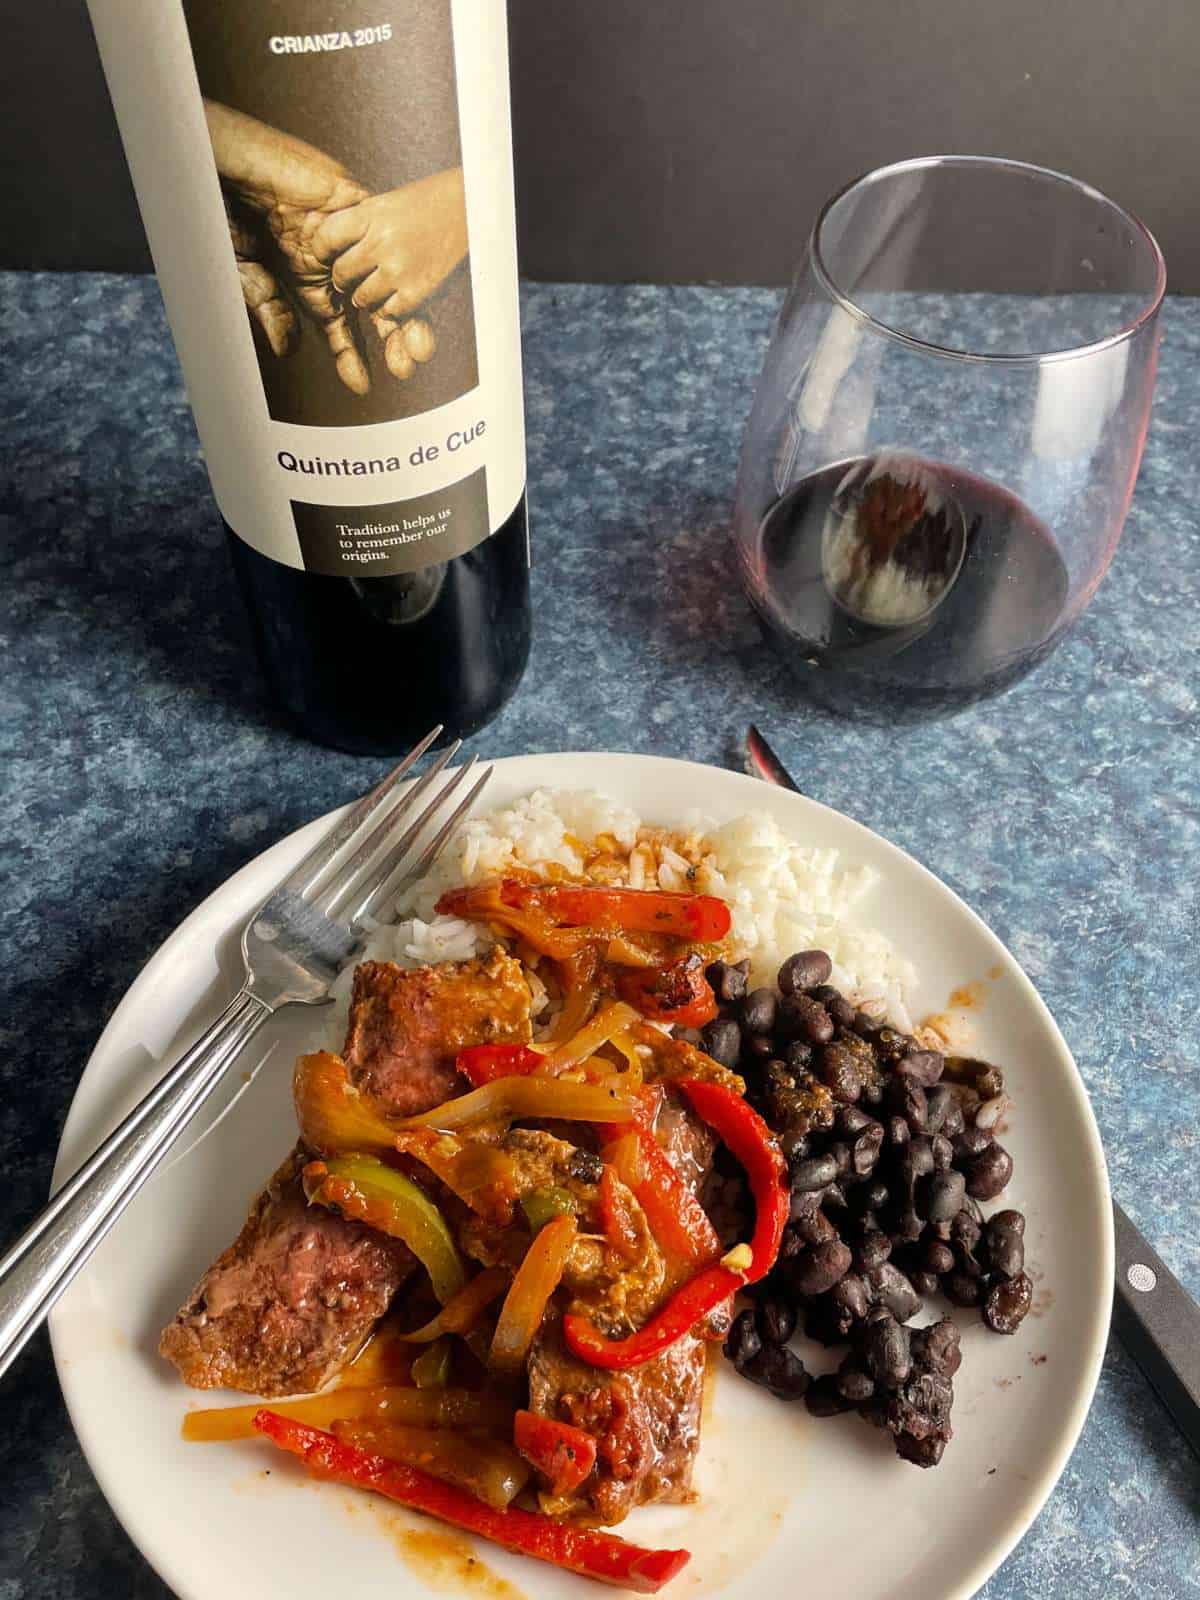 steak picado with black beans and rice on a white plate. Served with a red wine.